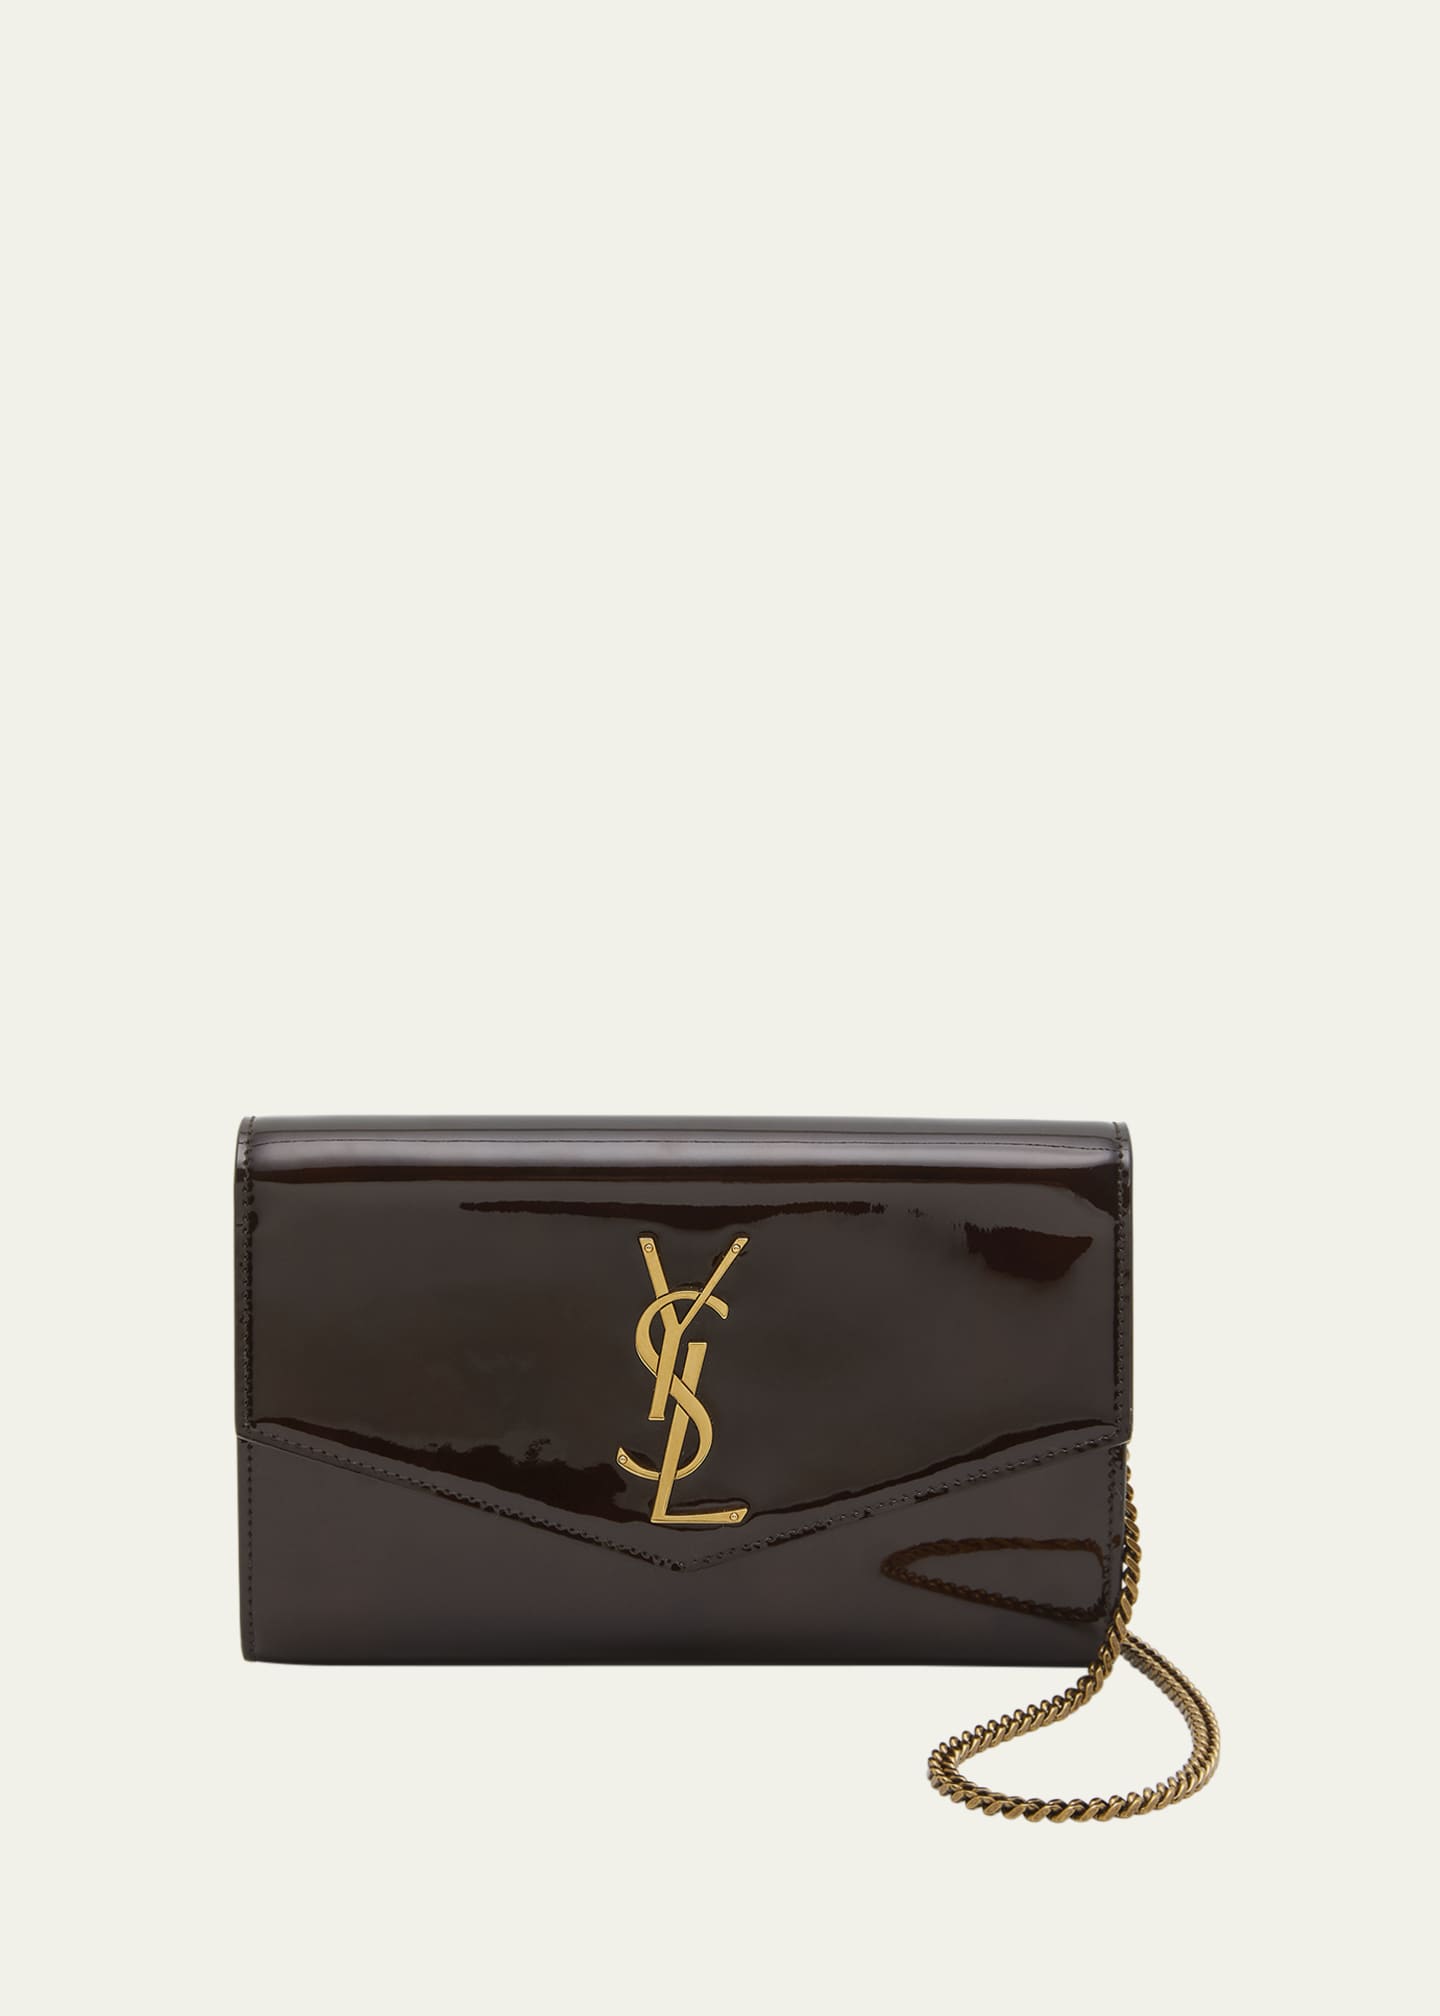 Saint Laurent Uptown Chain Wallet in Patent Leather